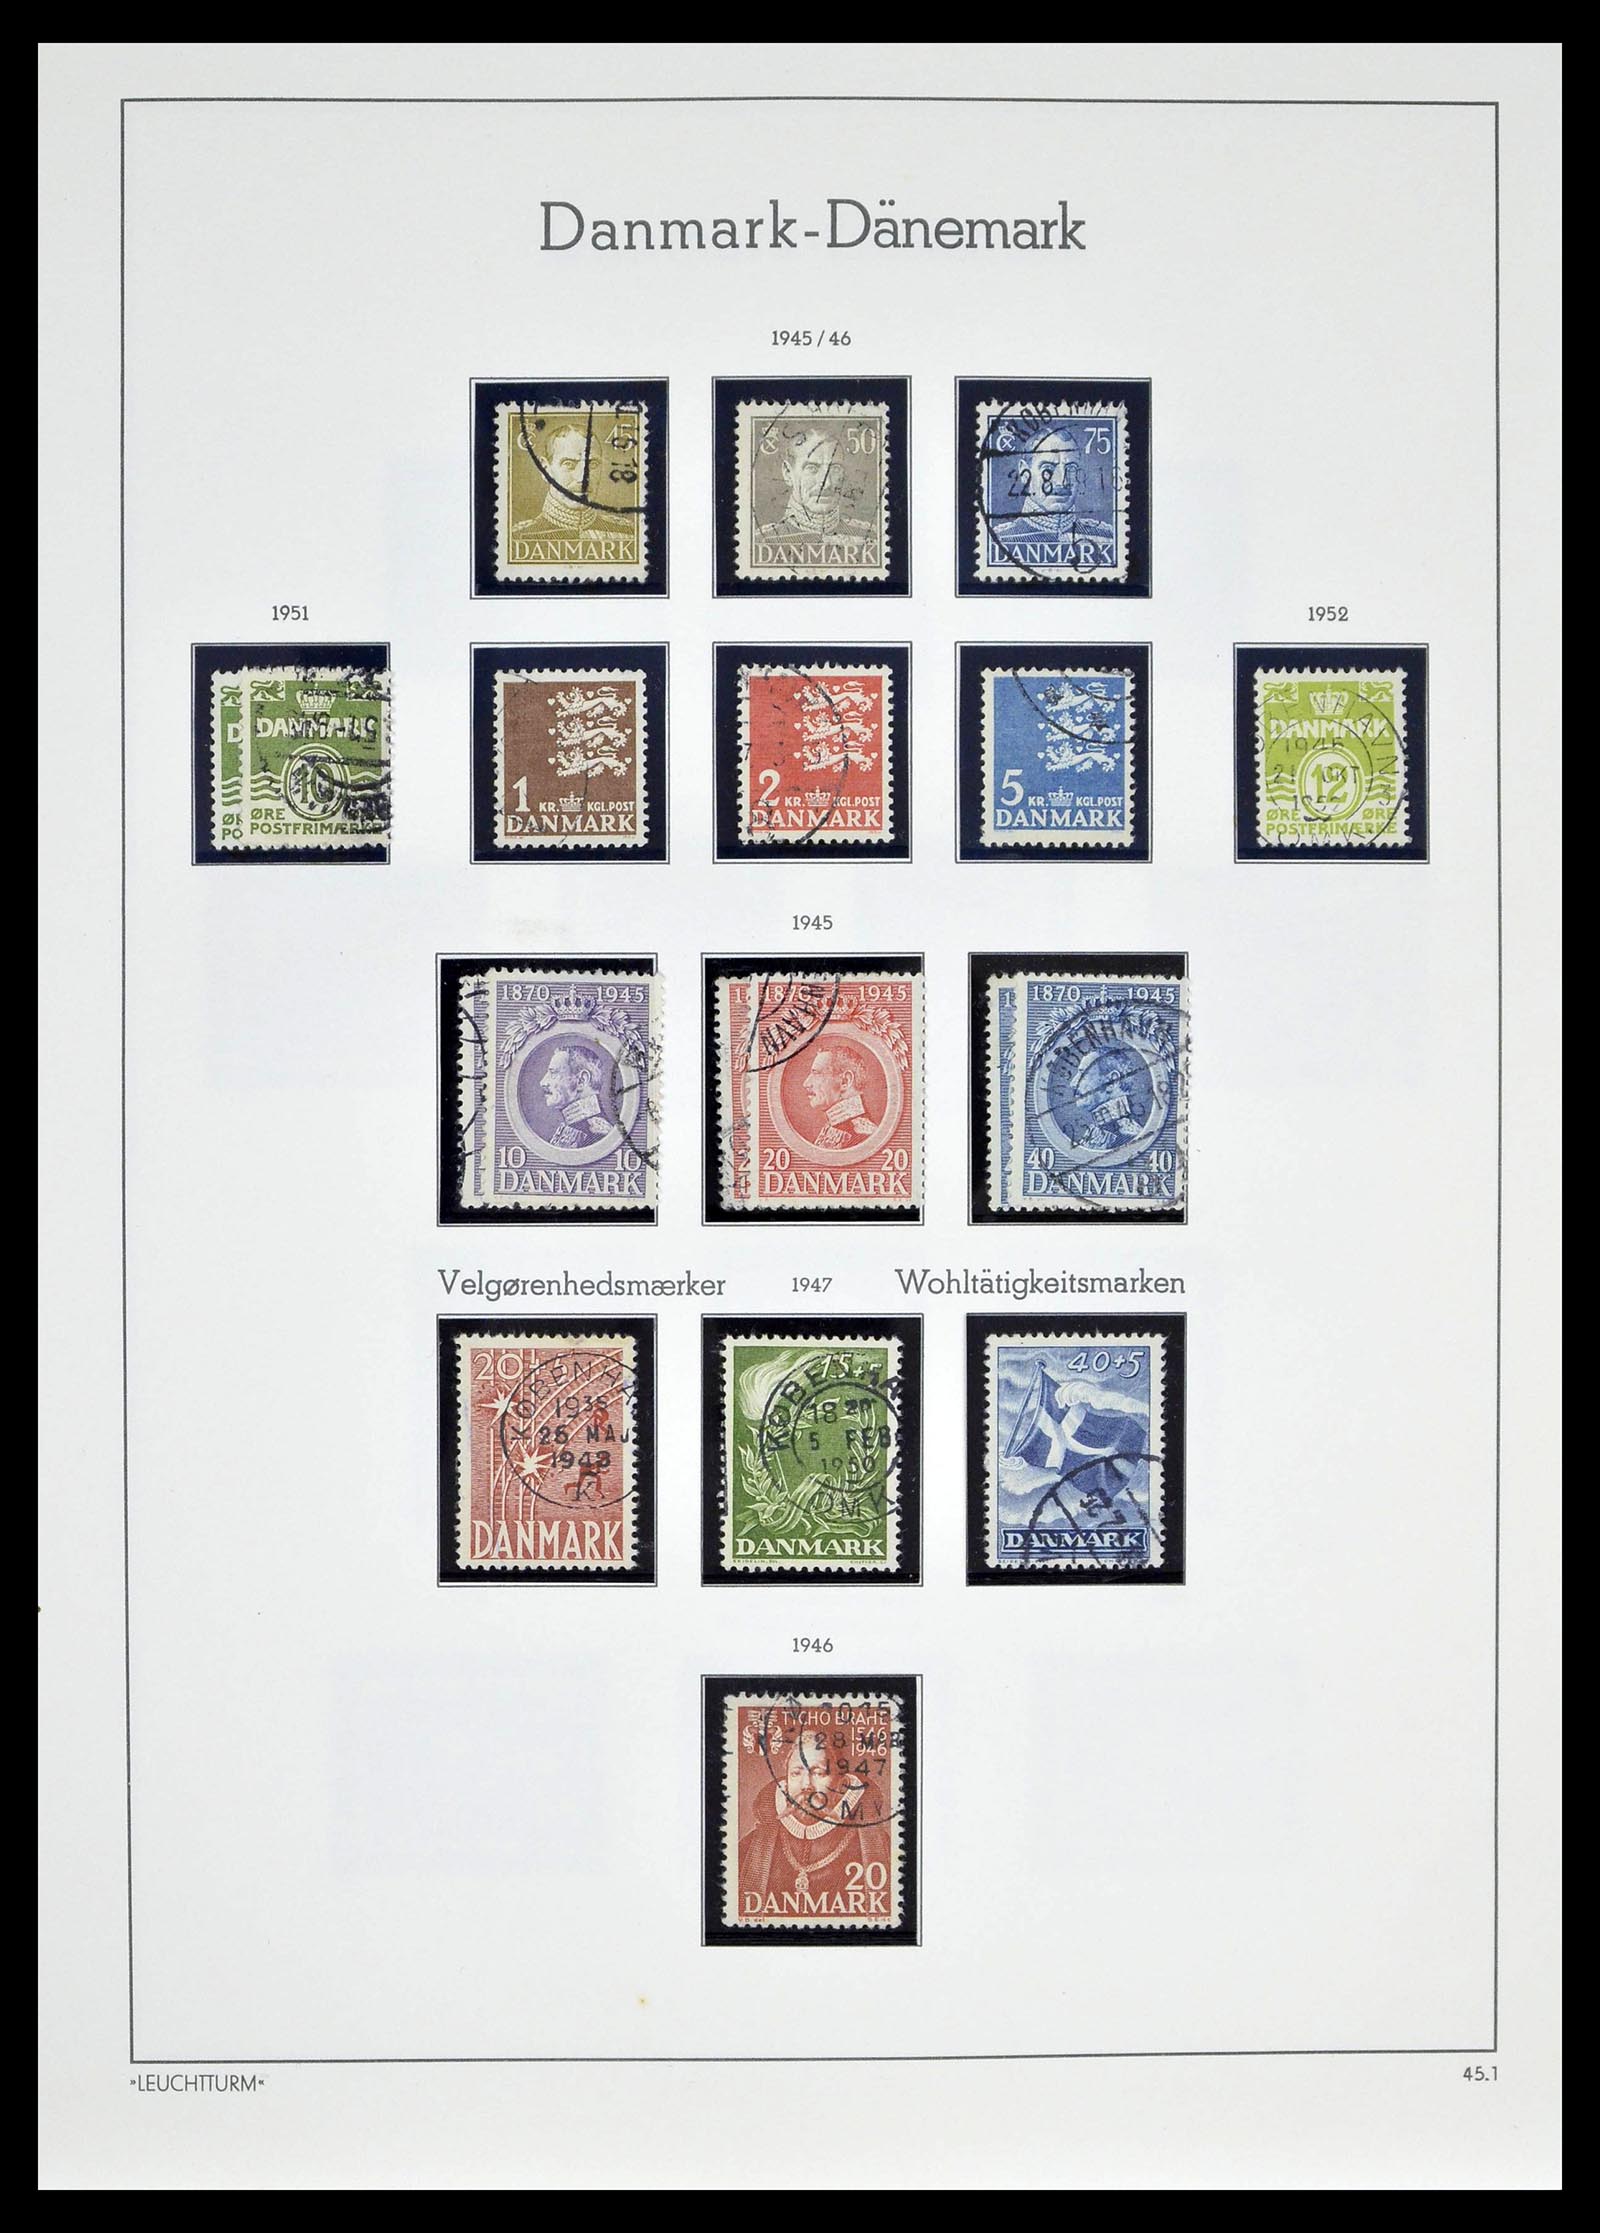 39394 0020 - Stamp collection 39394 Denmark 1851-1999.